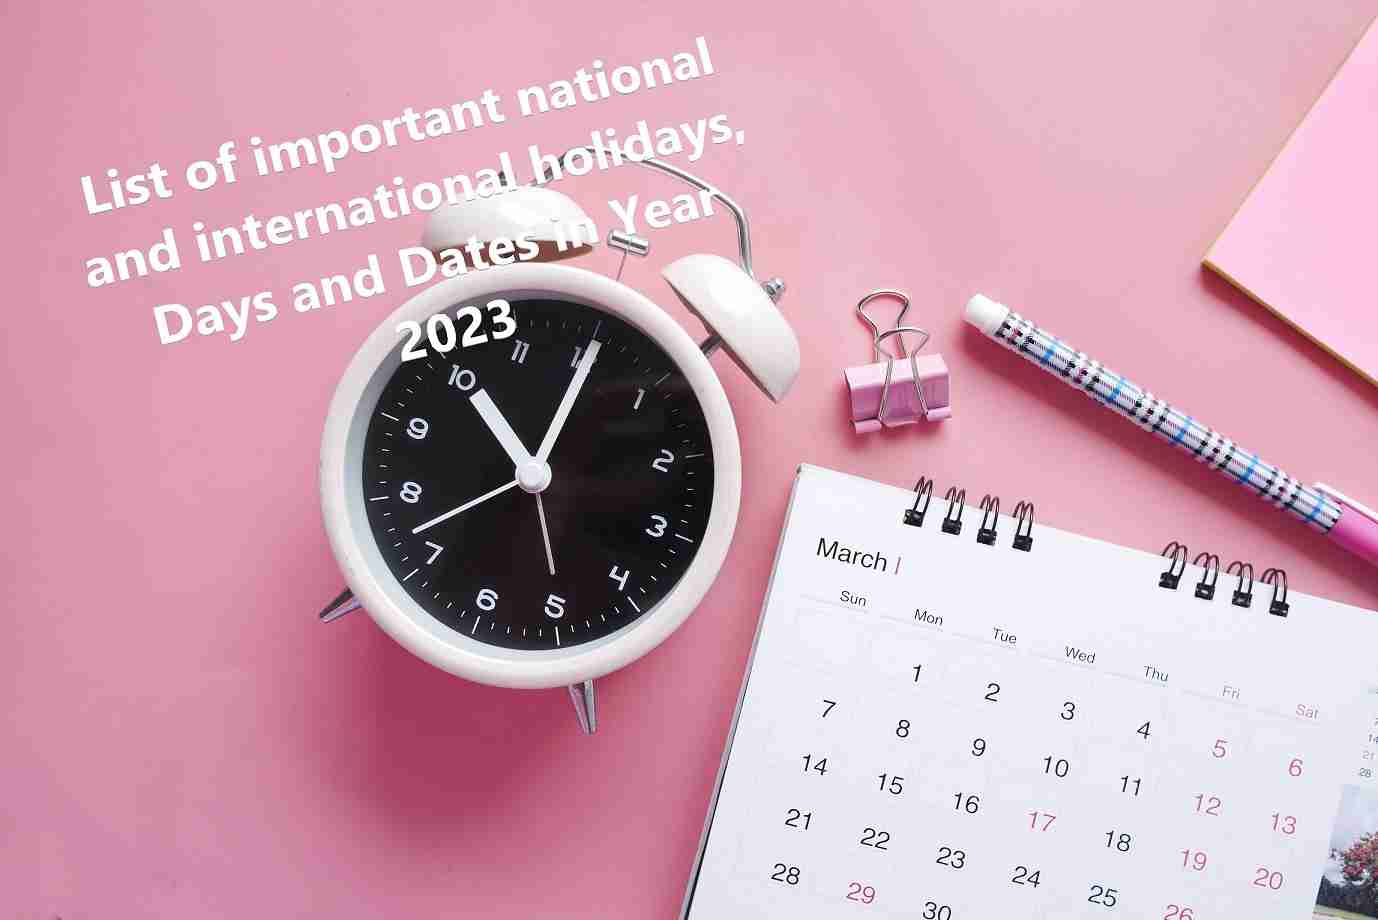 List of Important National and International Holidays, Days and Dates in Year 2023 | महत्वपुर्ण राष्ट्रीय और अंतर्राष्ट्रीय दिवस साल 2023 मे । Download Free PDF